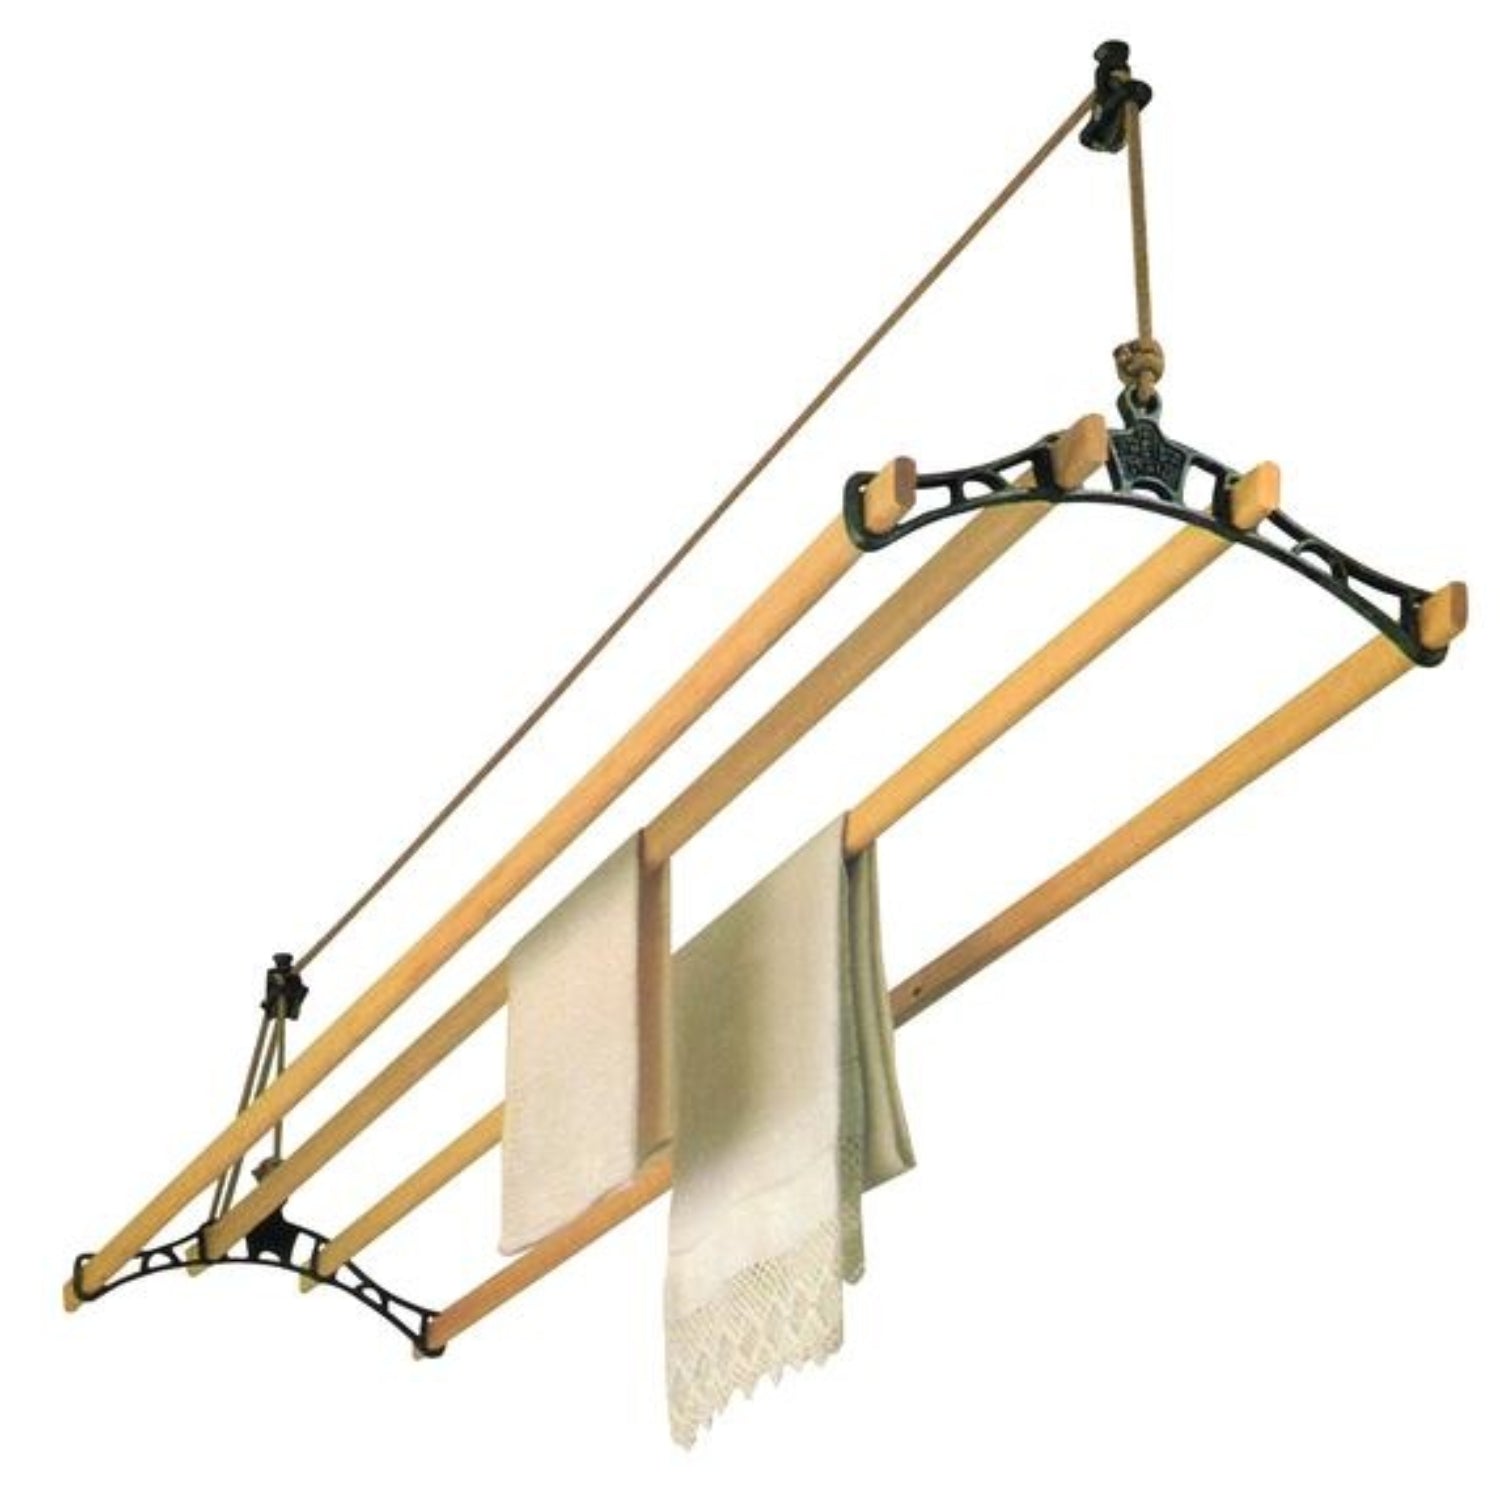 Traditional Ceiling Airer made by Sheila Maid.  Sold by Julu